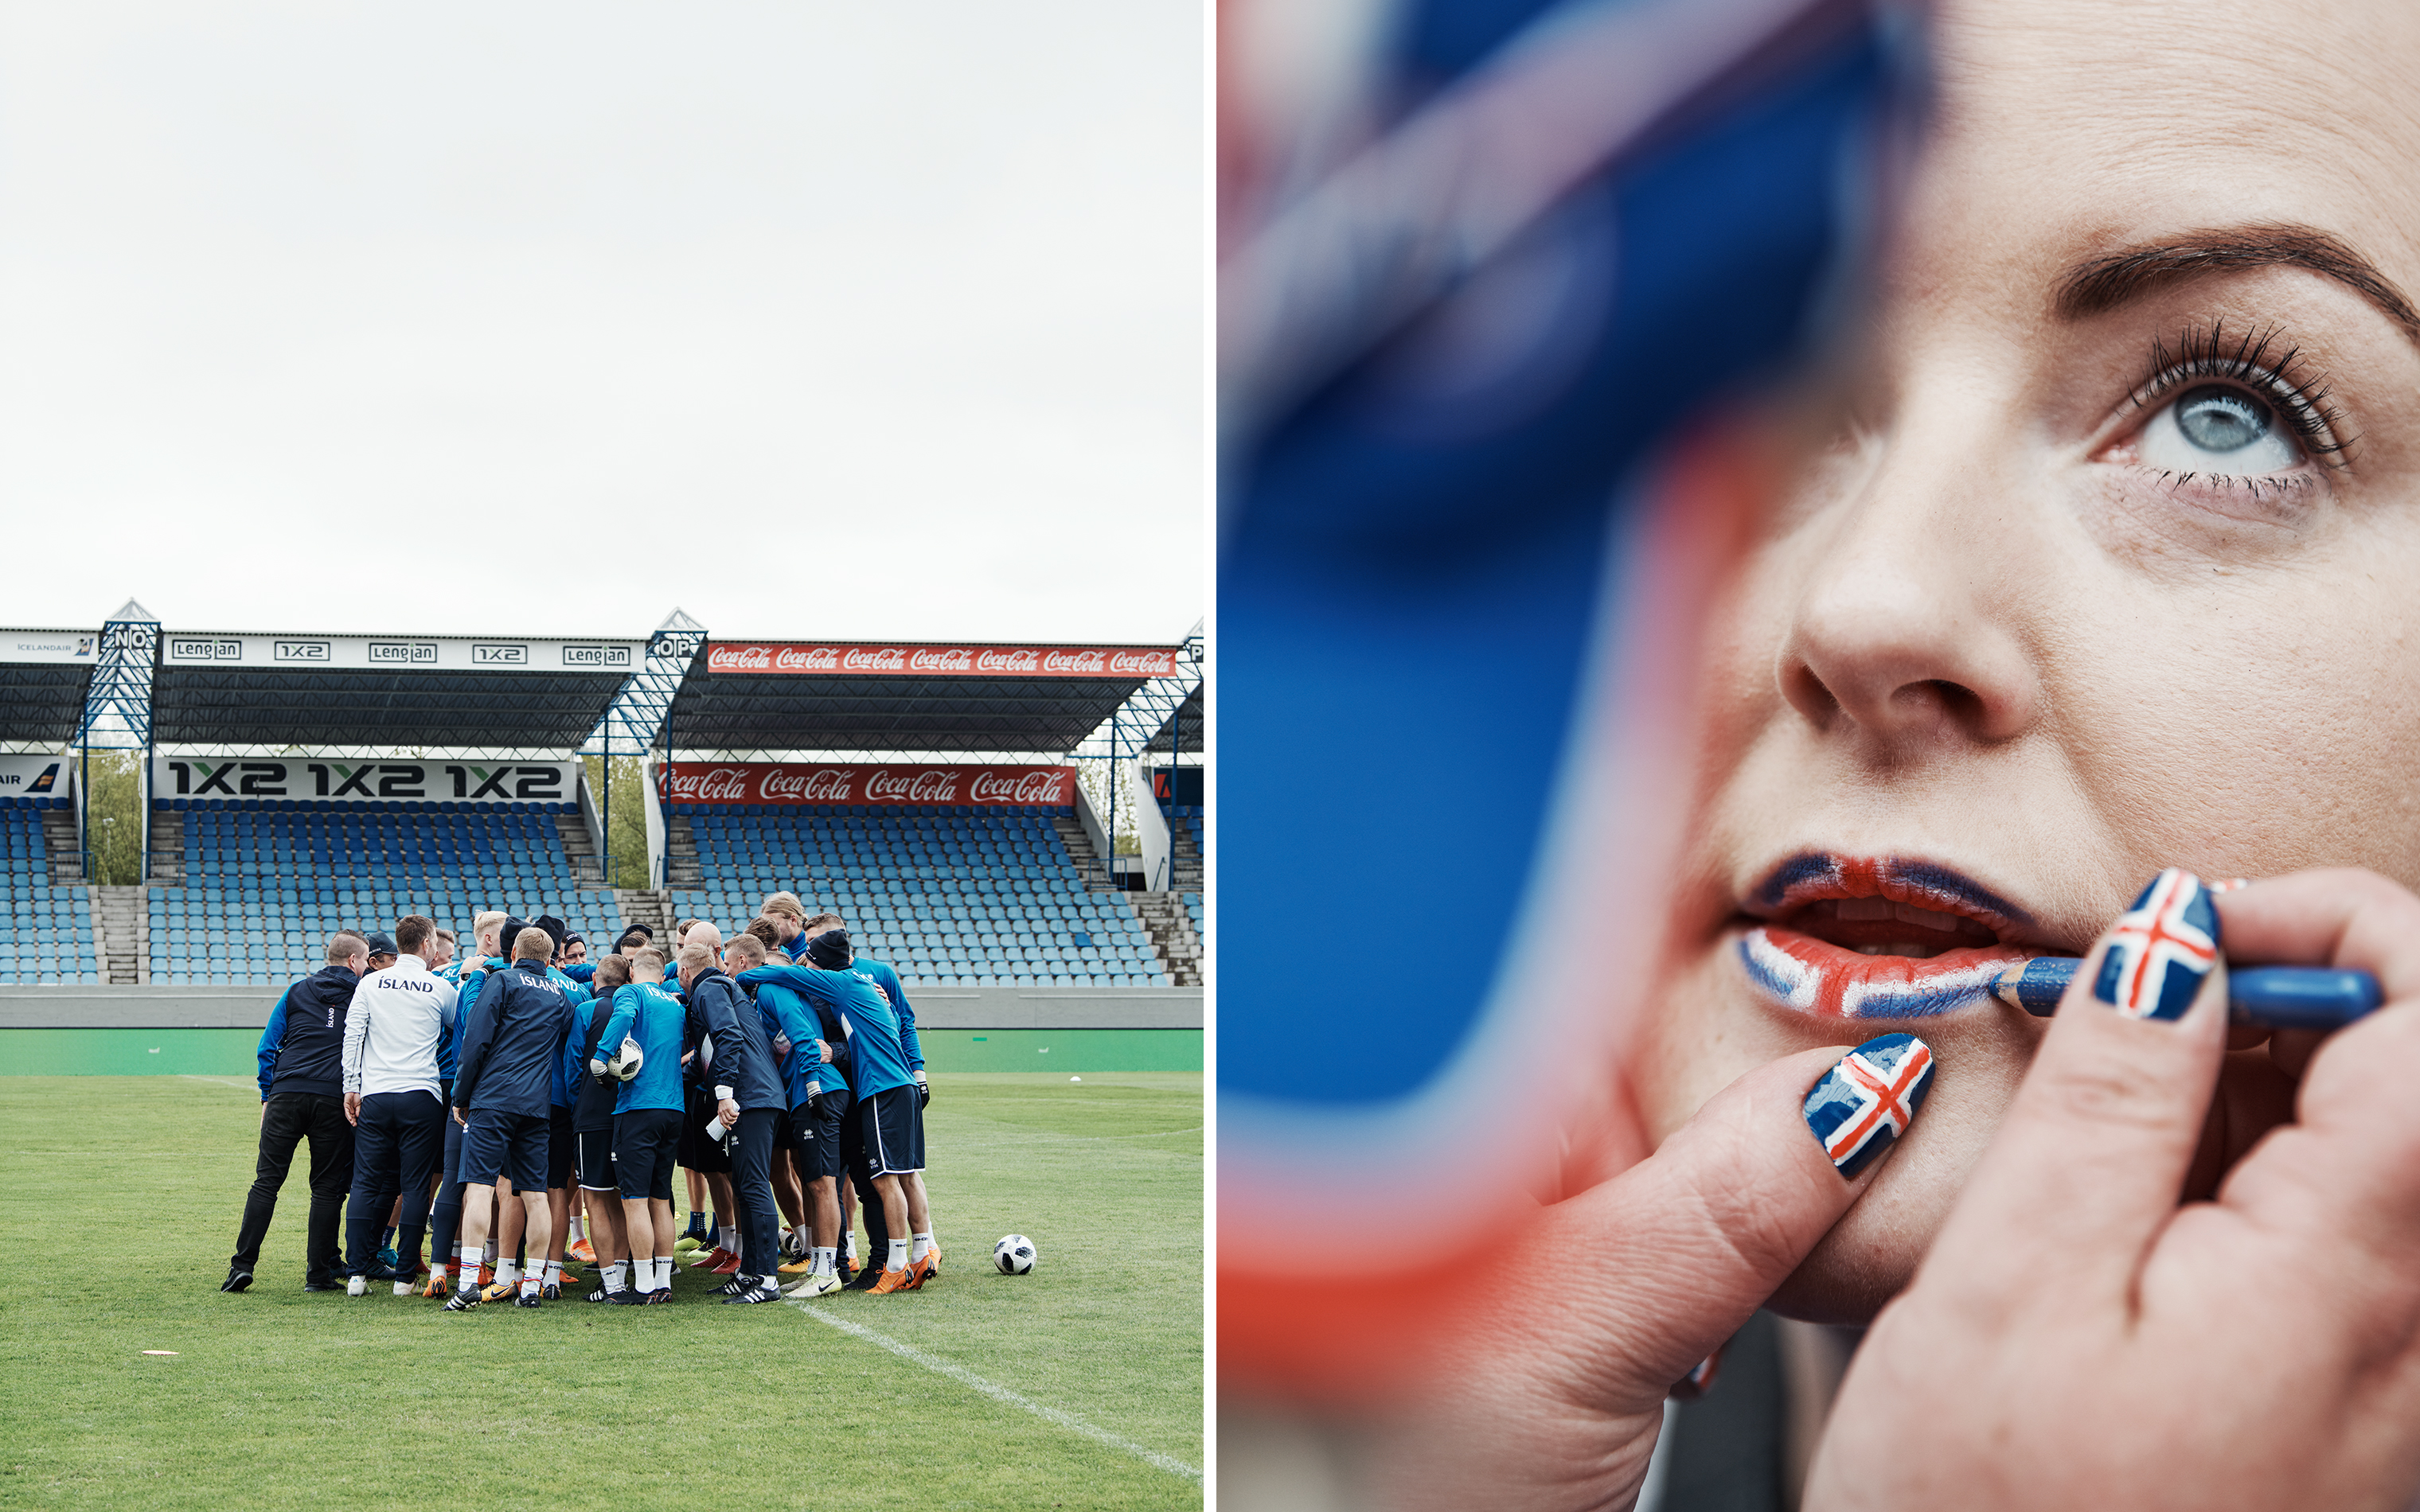 Iceland Is the Ultimate Underdog in the 2018 FIFA World Cup